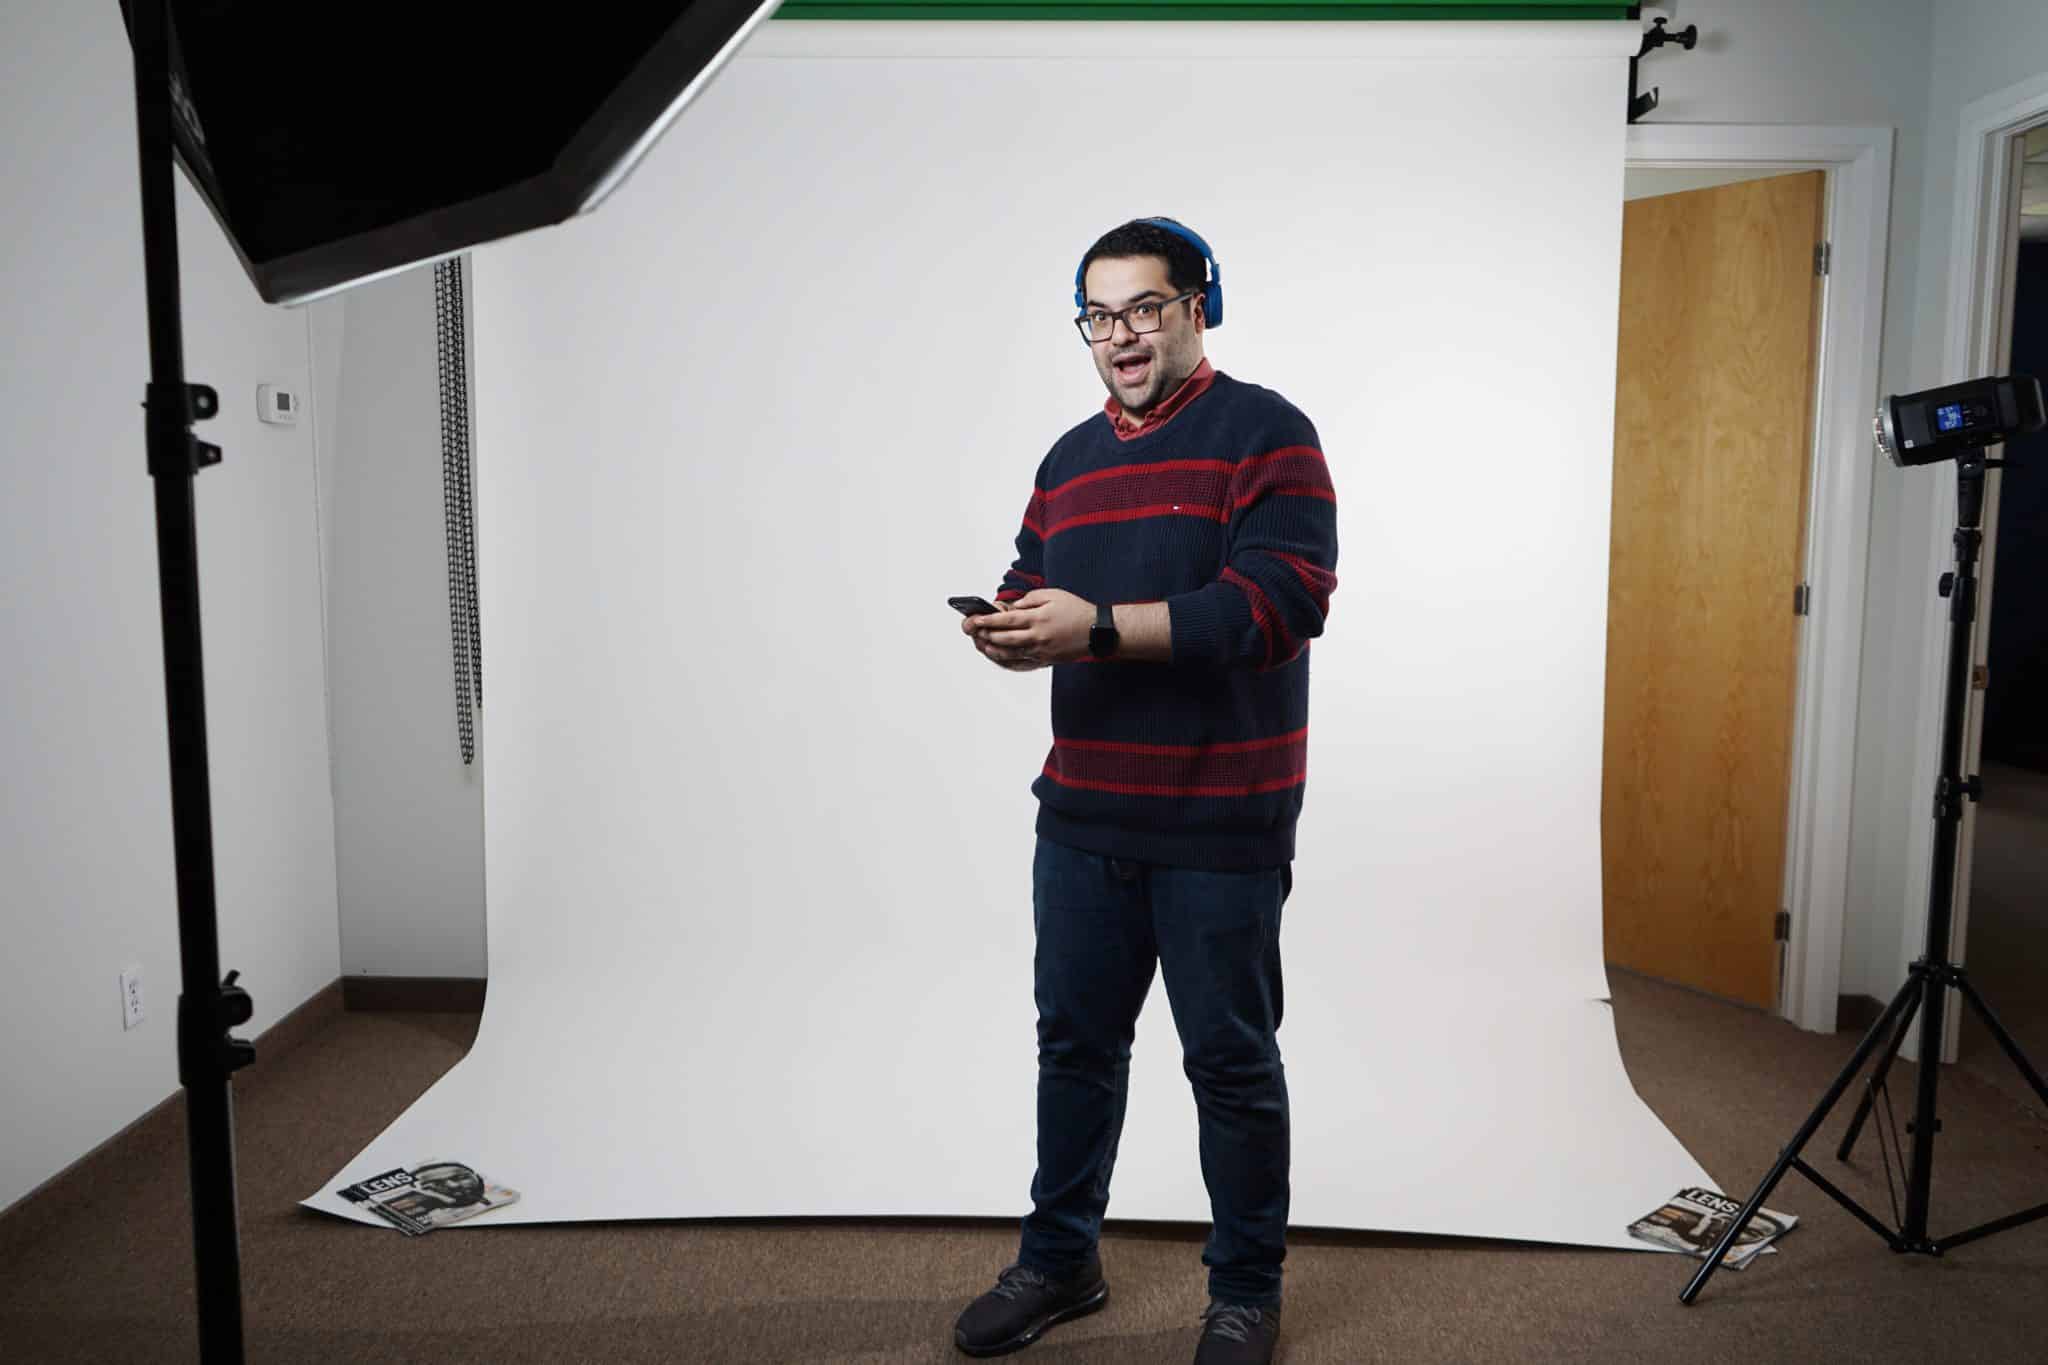 A man standing in front of a camera in a studio.